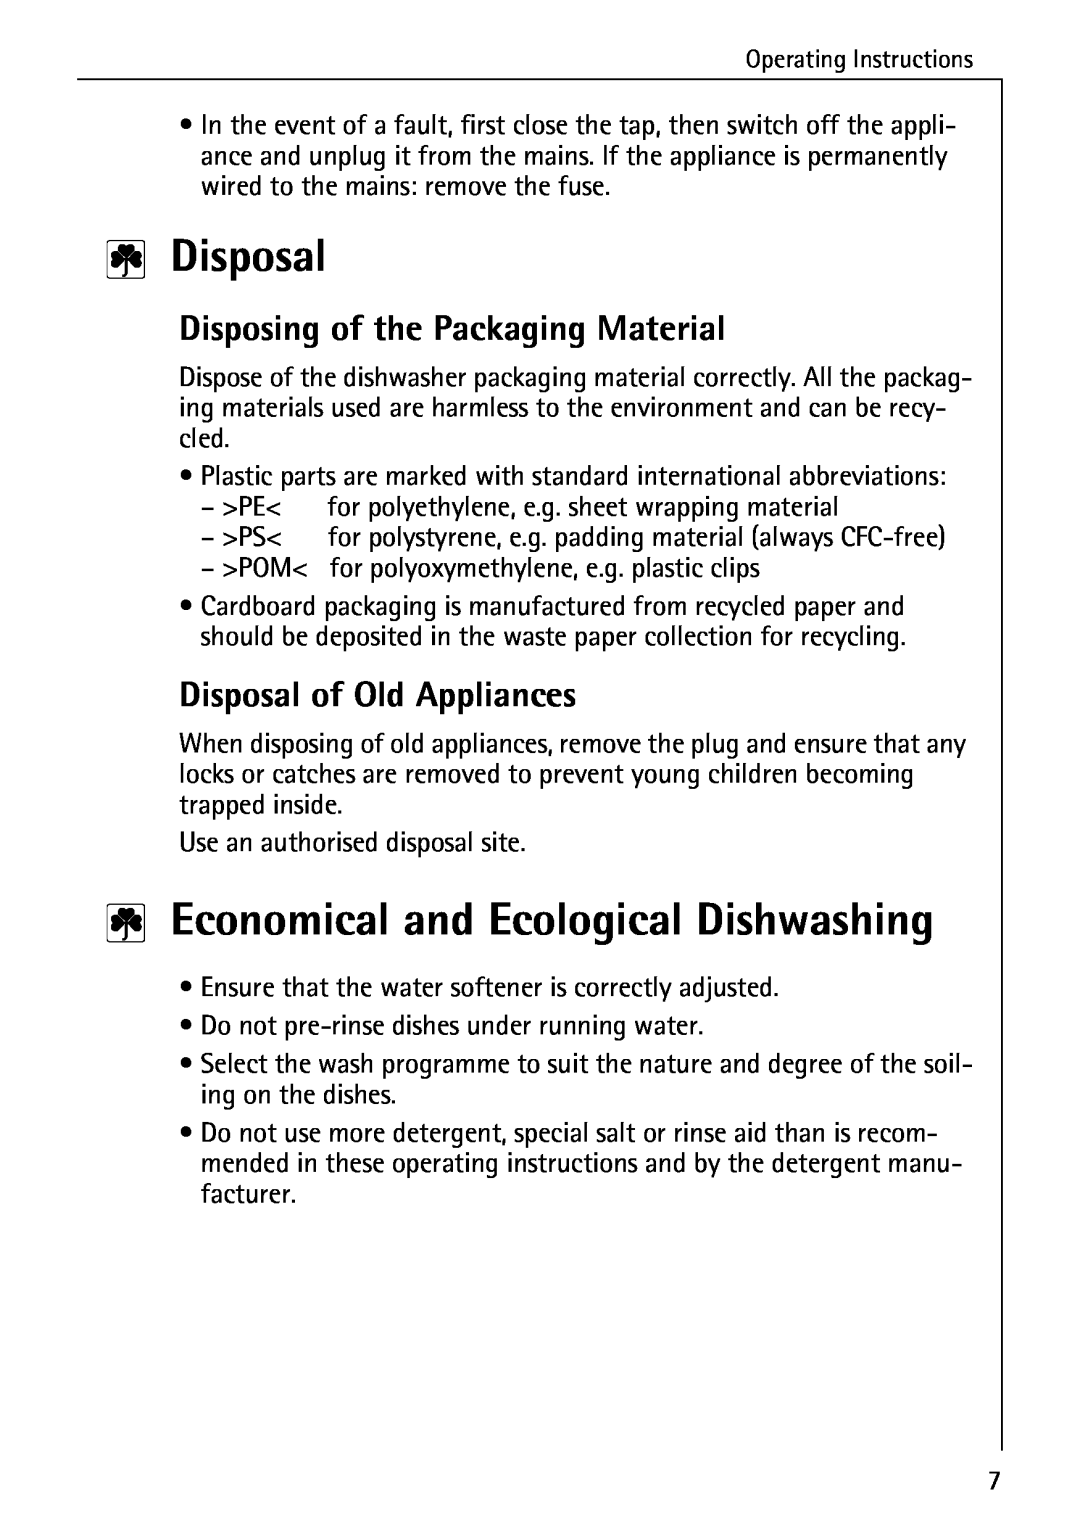 Electrolux FAVORIT 40660 i manual Disposal, Economical and Ecological Dishwashing, Disposing of the Packaging Material 